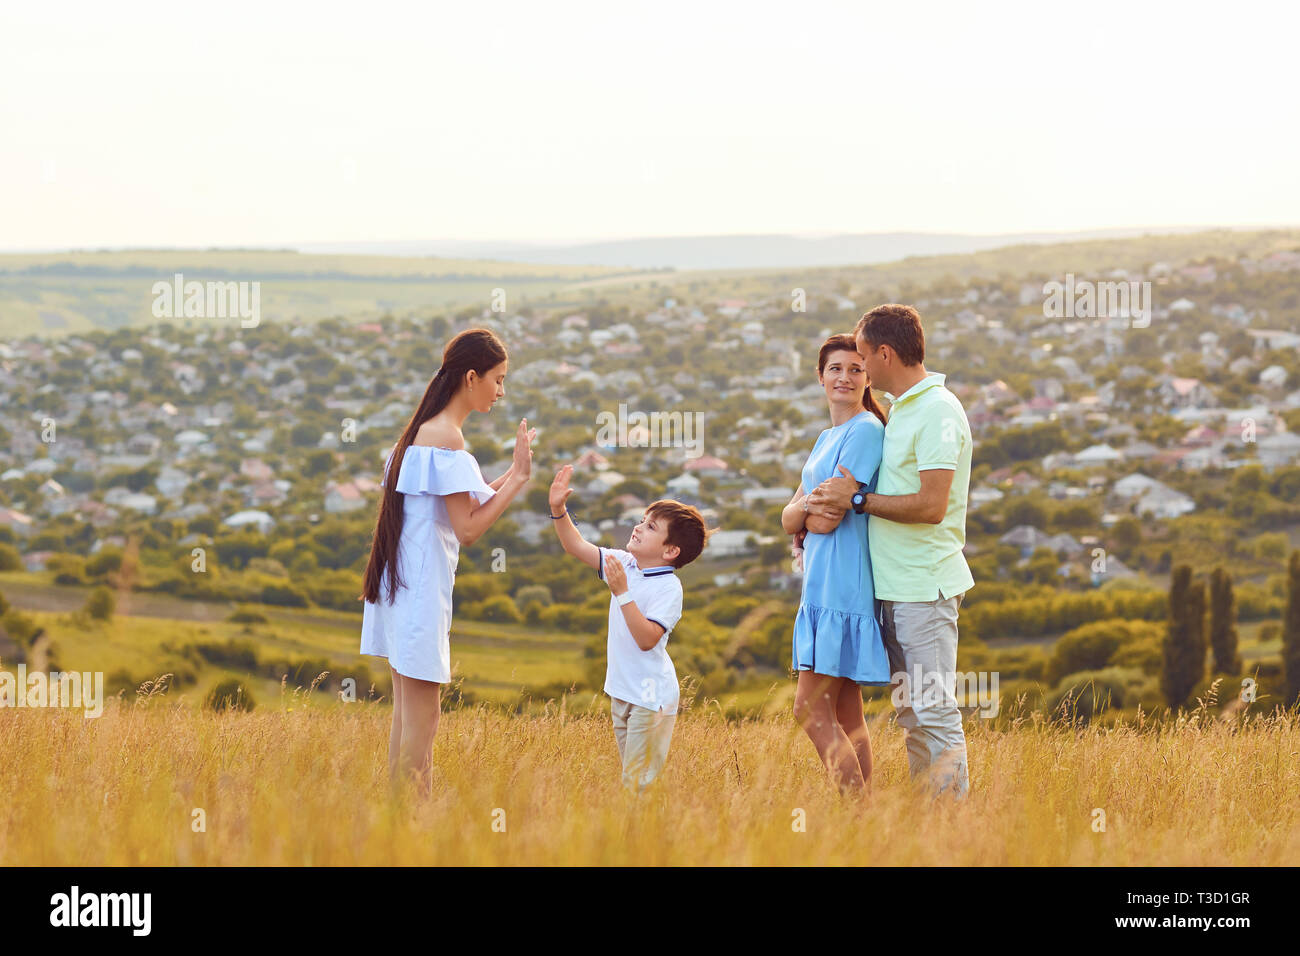 Happy family playing fun on the field at sunset. Stock Photo